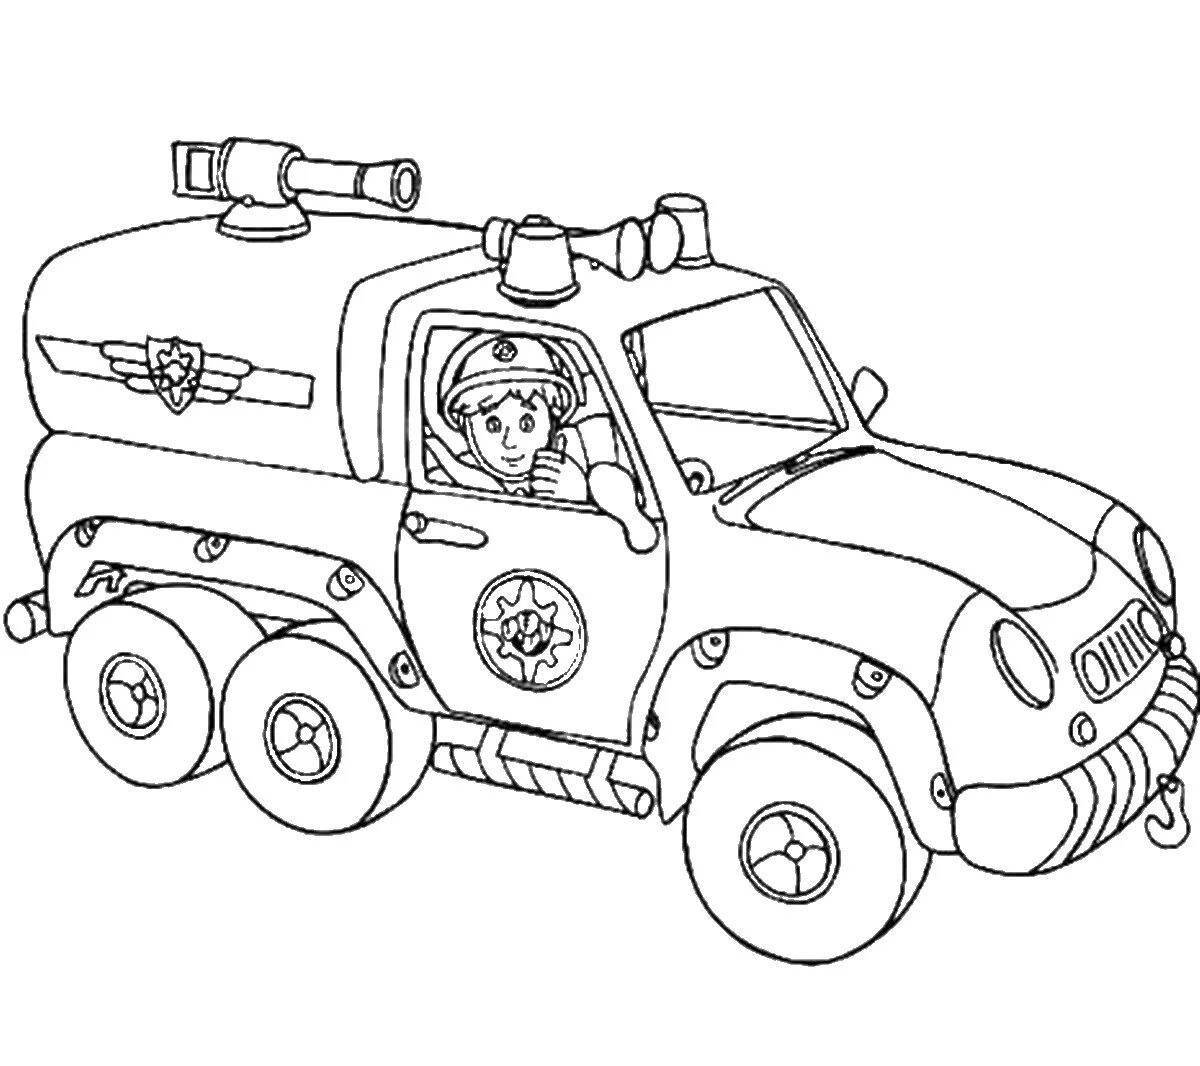 Funny finley fire truck coloring book